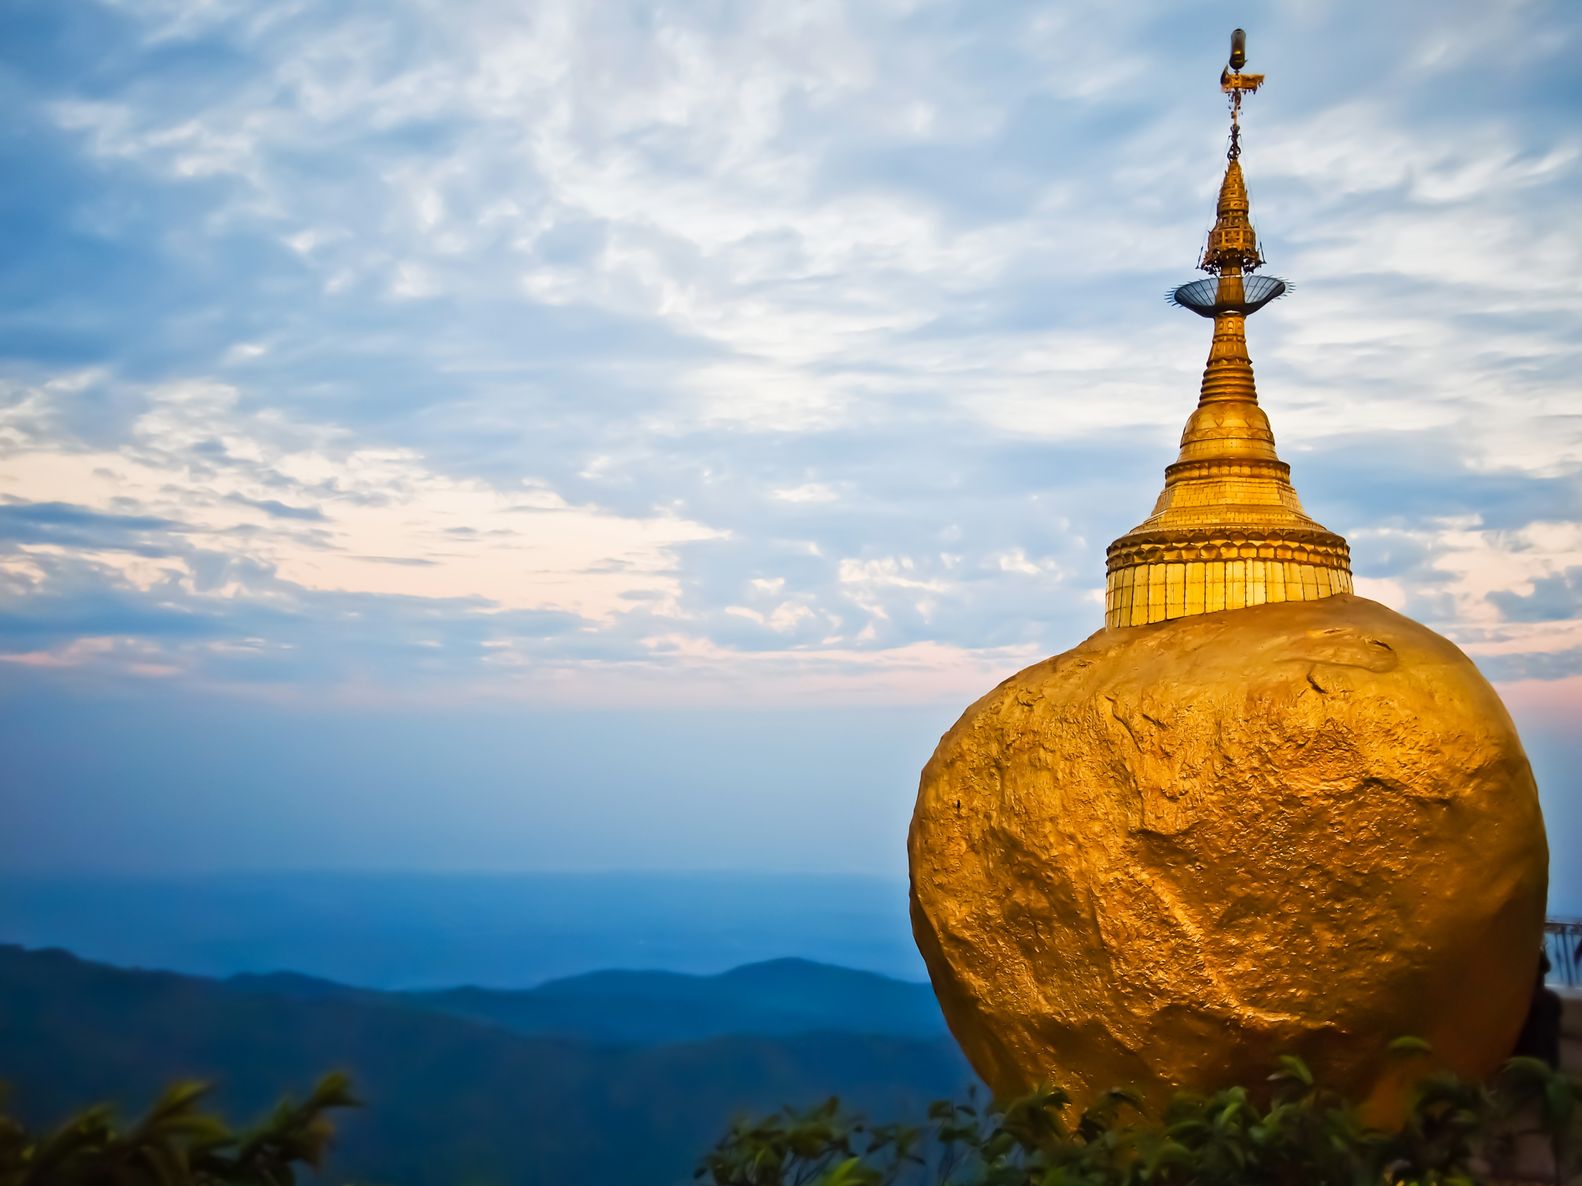 Central Bank Of Myanmar Announces Plans For Further Liberalisation Of The Myanmar Banking Industry.